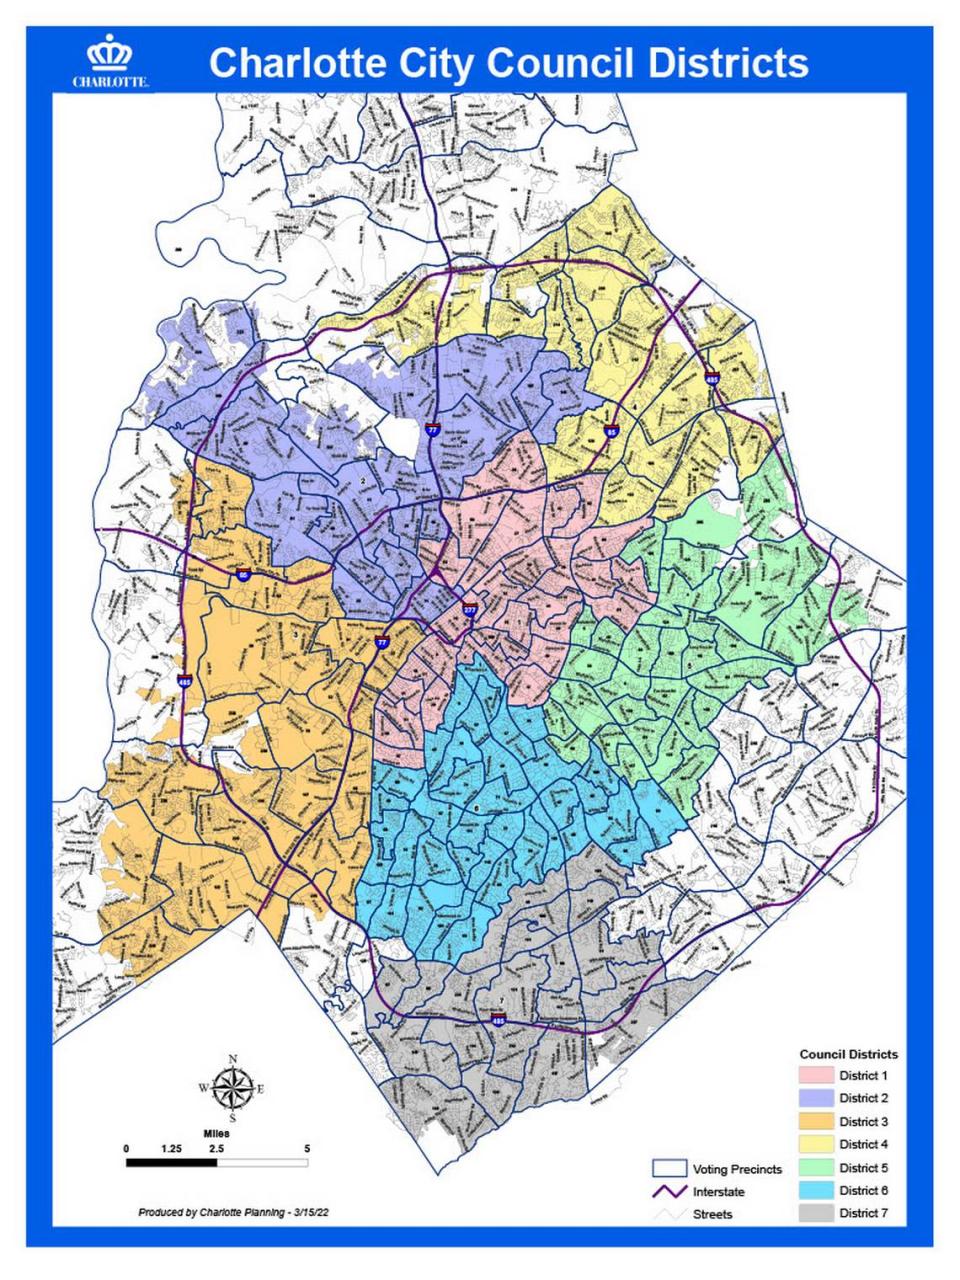 This map shows the Charlotte City Council districts. District 4 is in yellow. It includes University City and parts of northeast Charlotte.